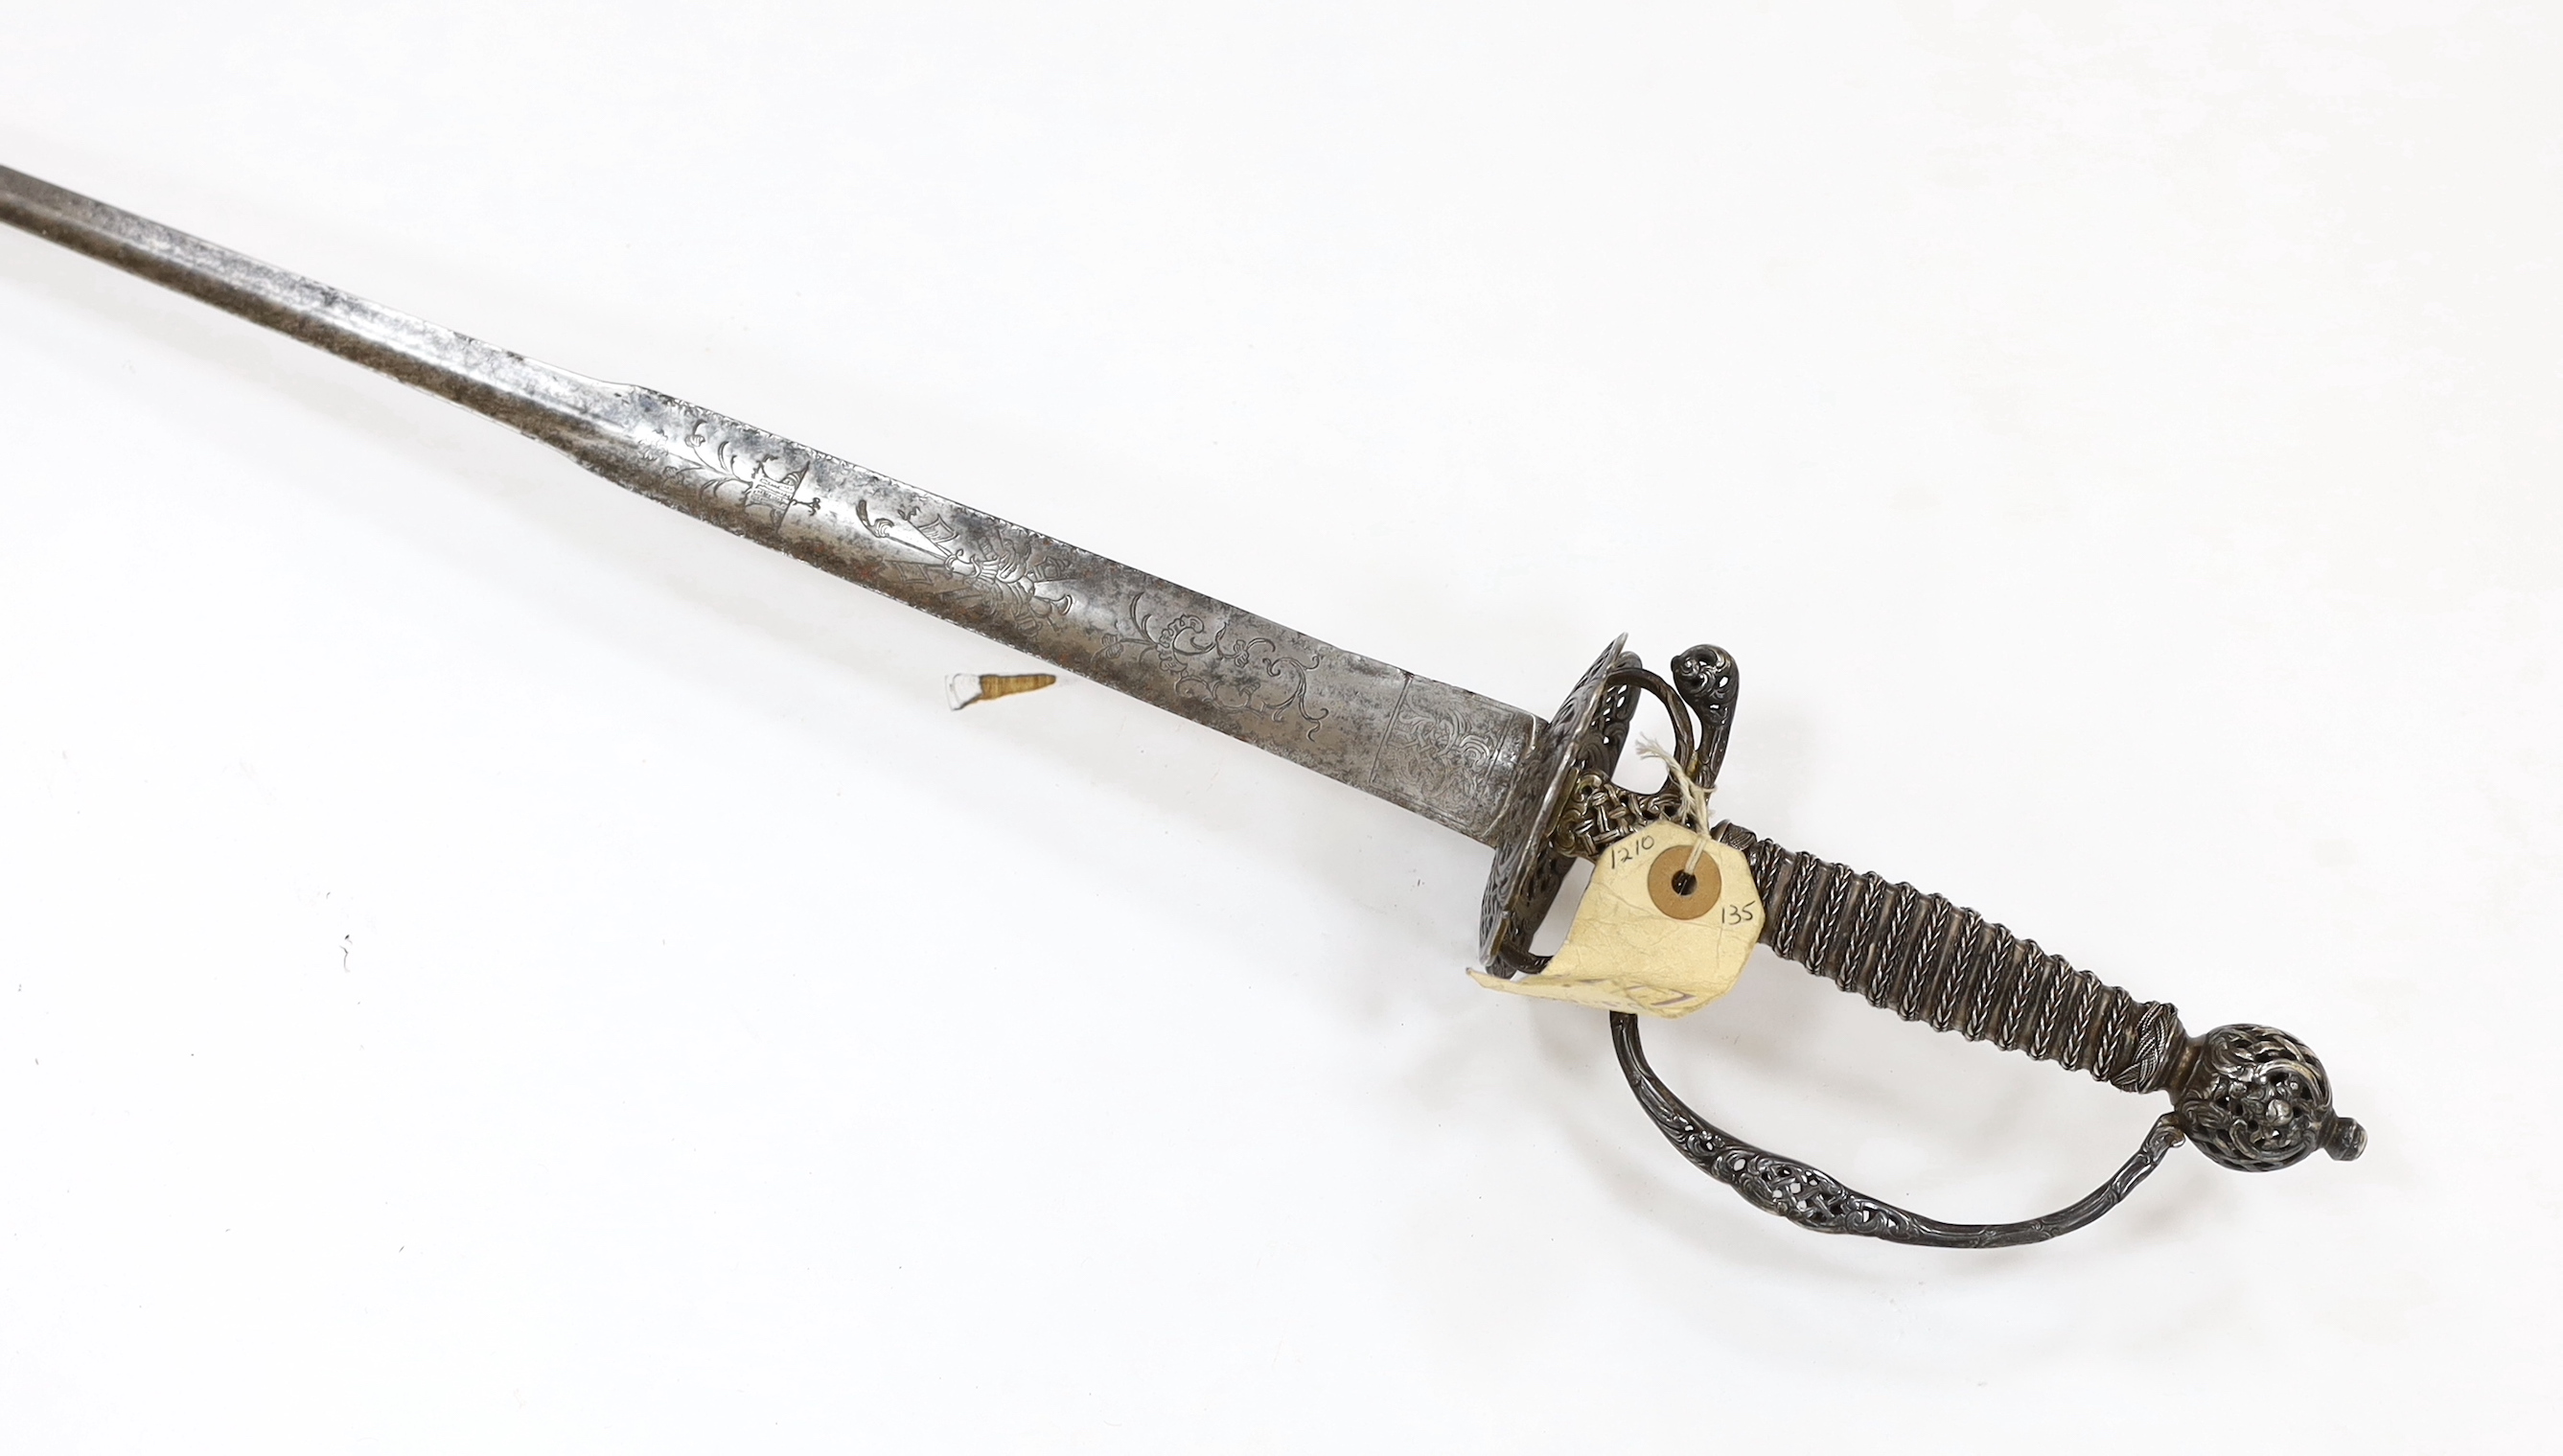 A French silver hilted small sword, c.1770, the ricasso rings have two tiny marks struck on the end which possibly could be Paris discharge marks, the hilt pierced with basketweave decoration and flowers, silver wire and